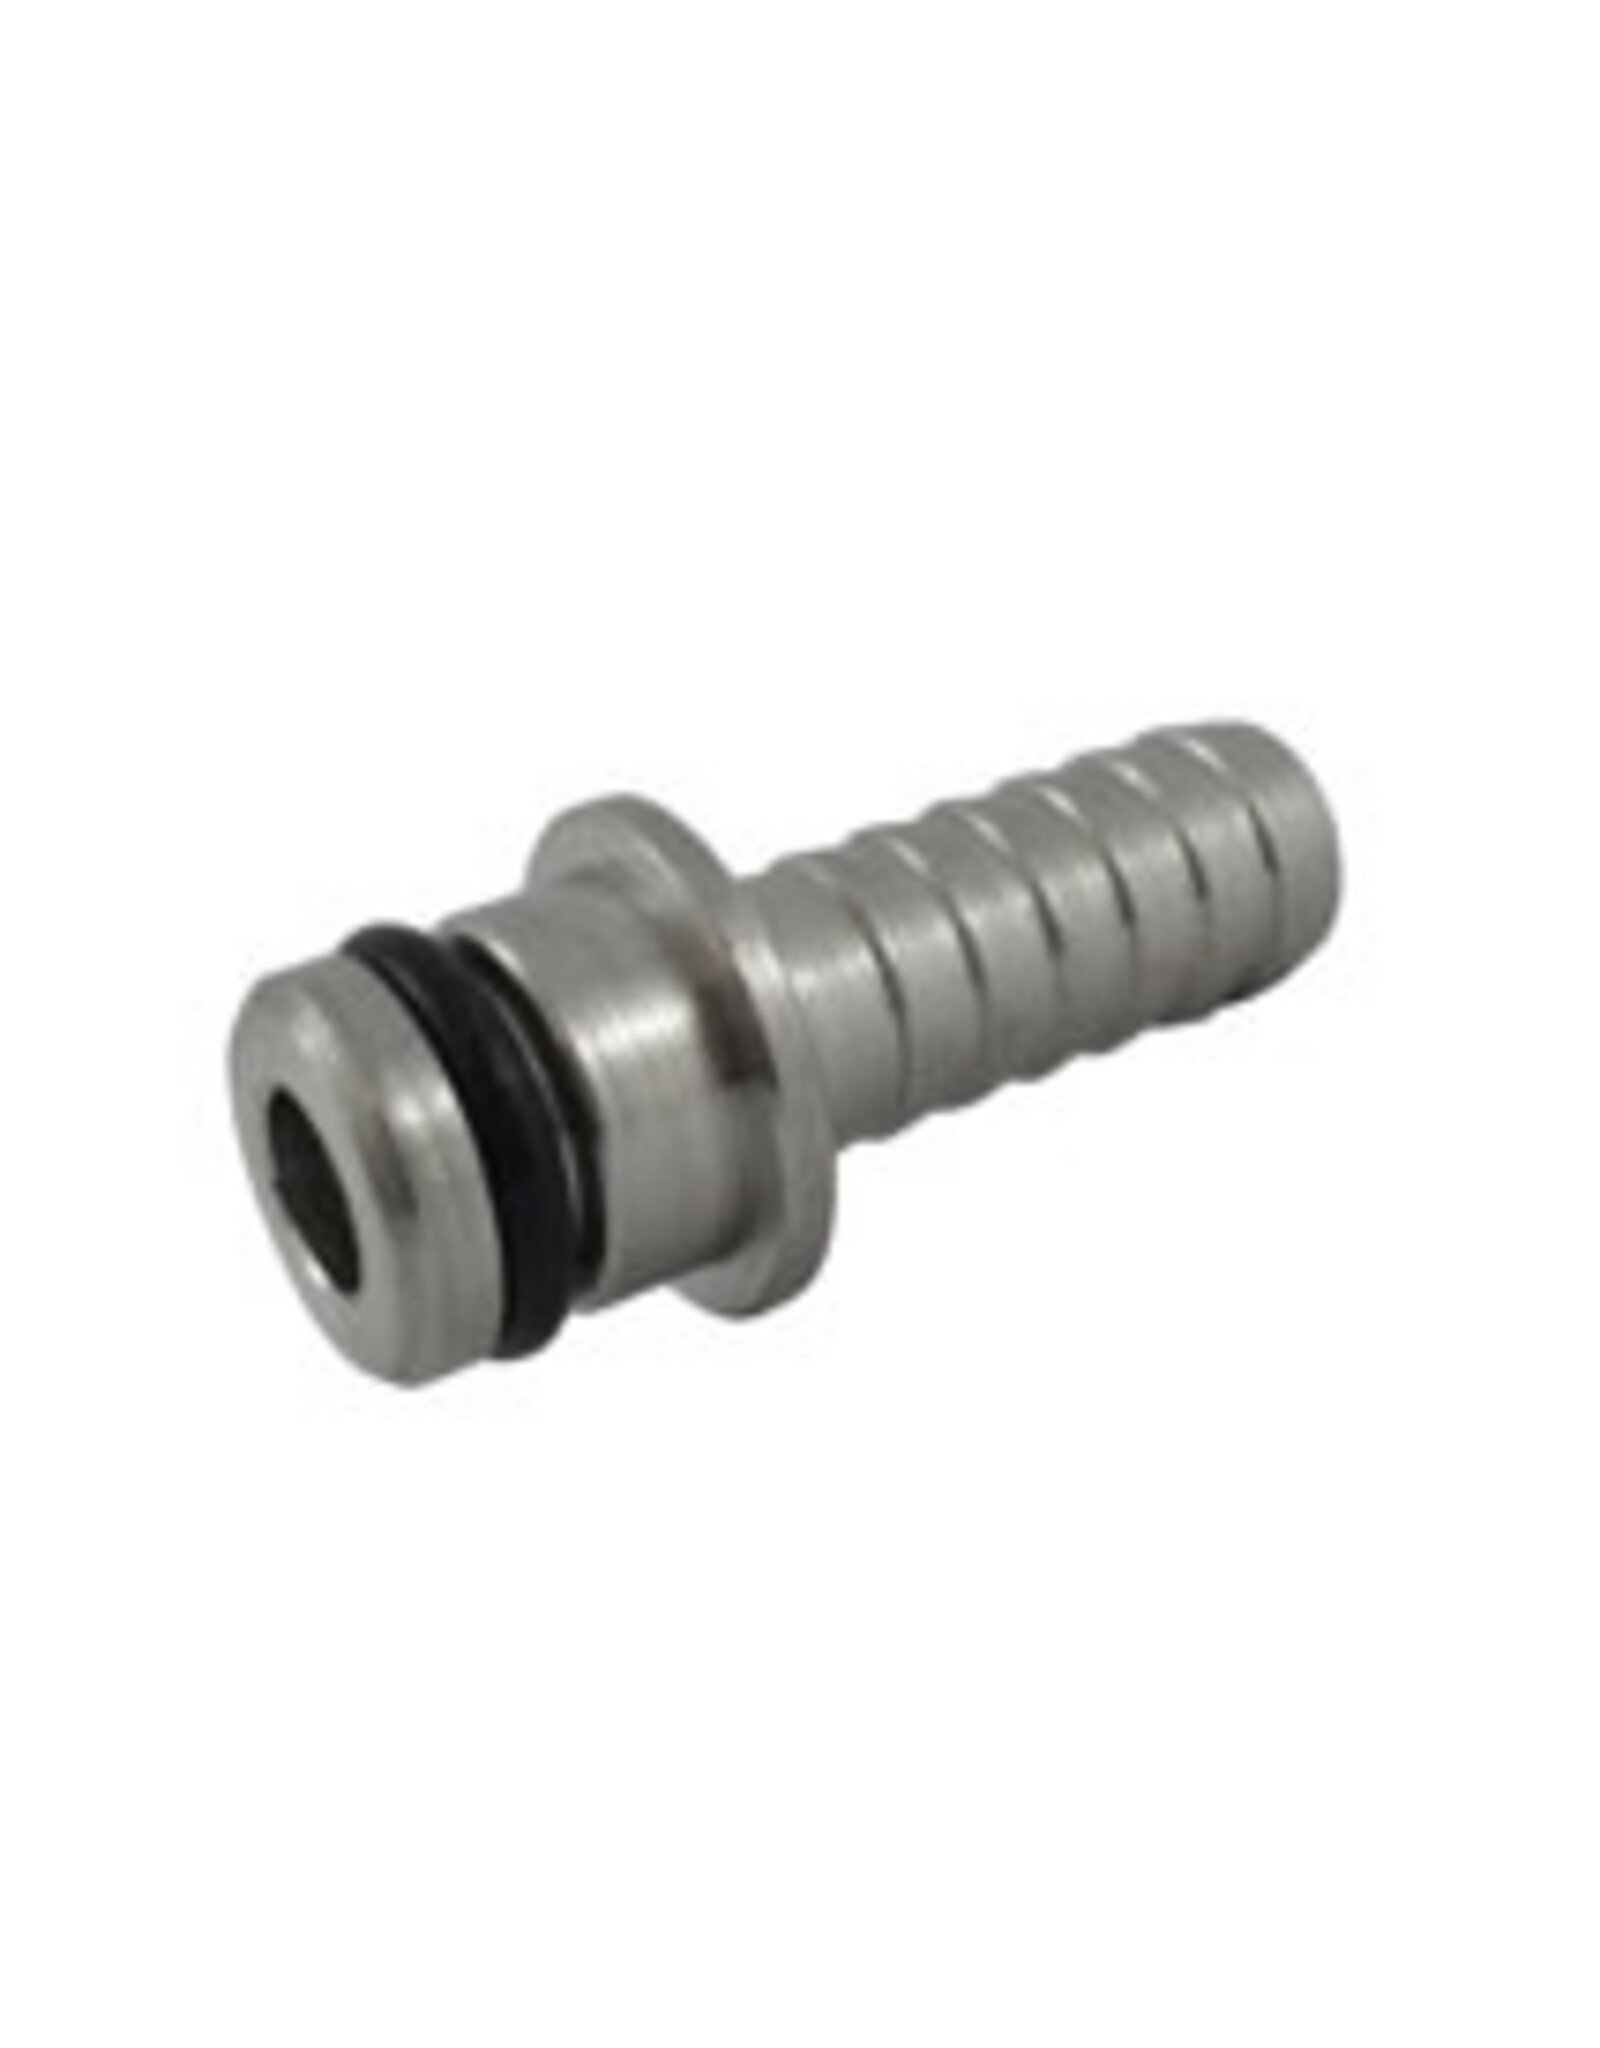 STRAIGHT INLET FITTING-FOR WB GUNS, 1/4"B (S/S)